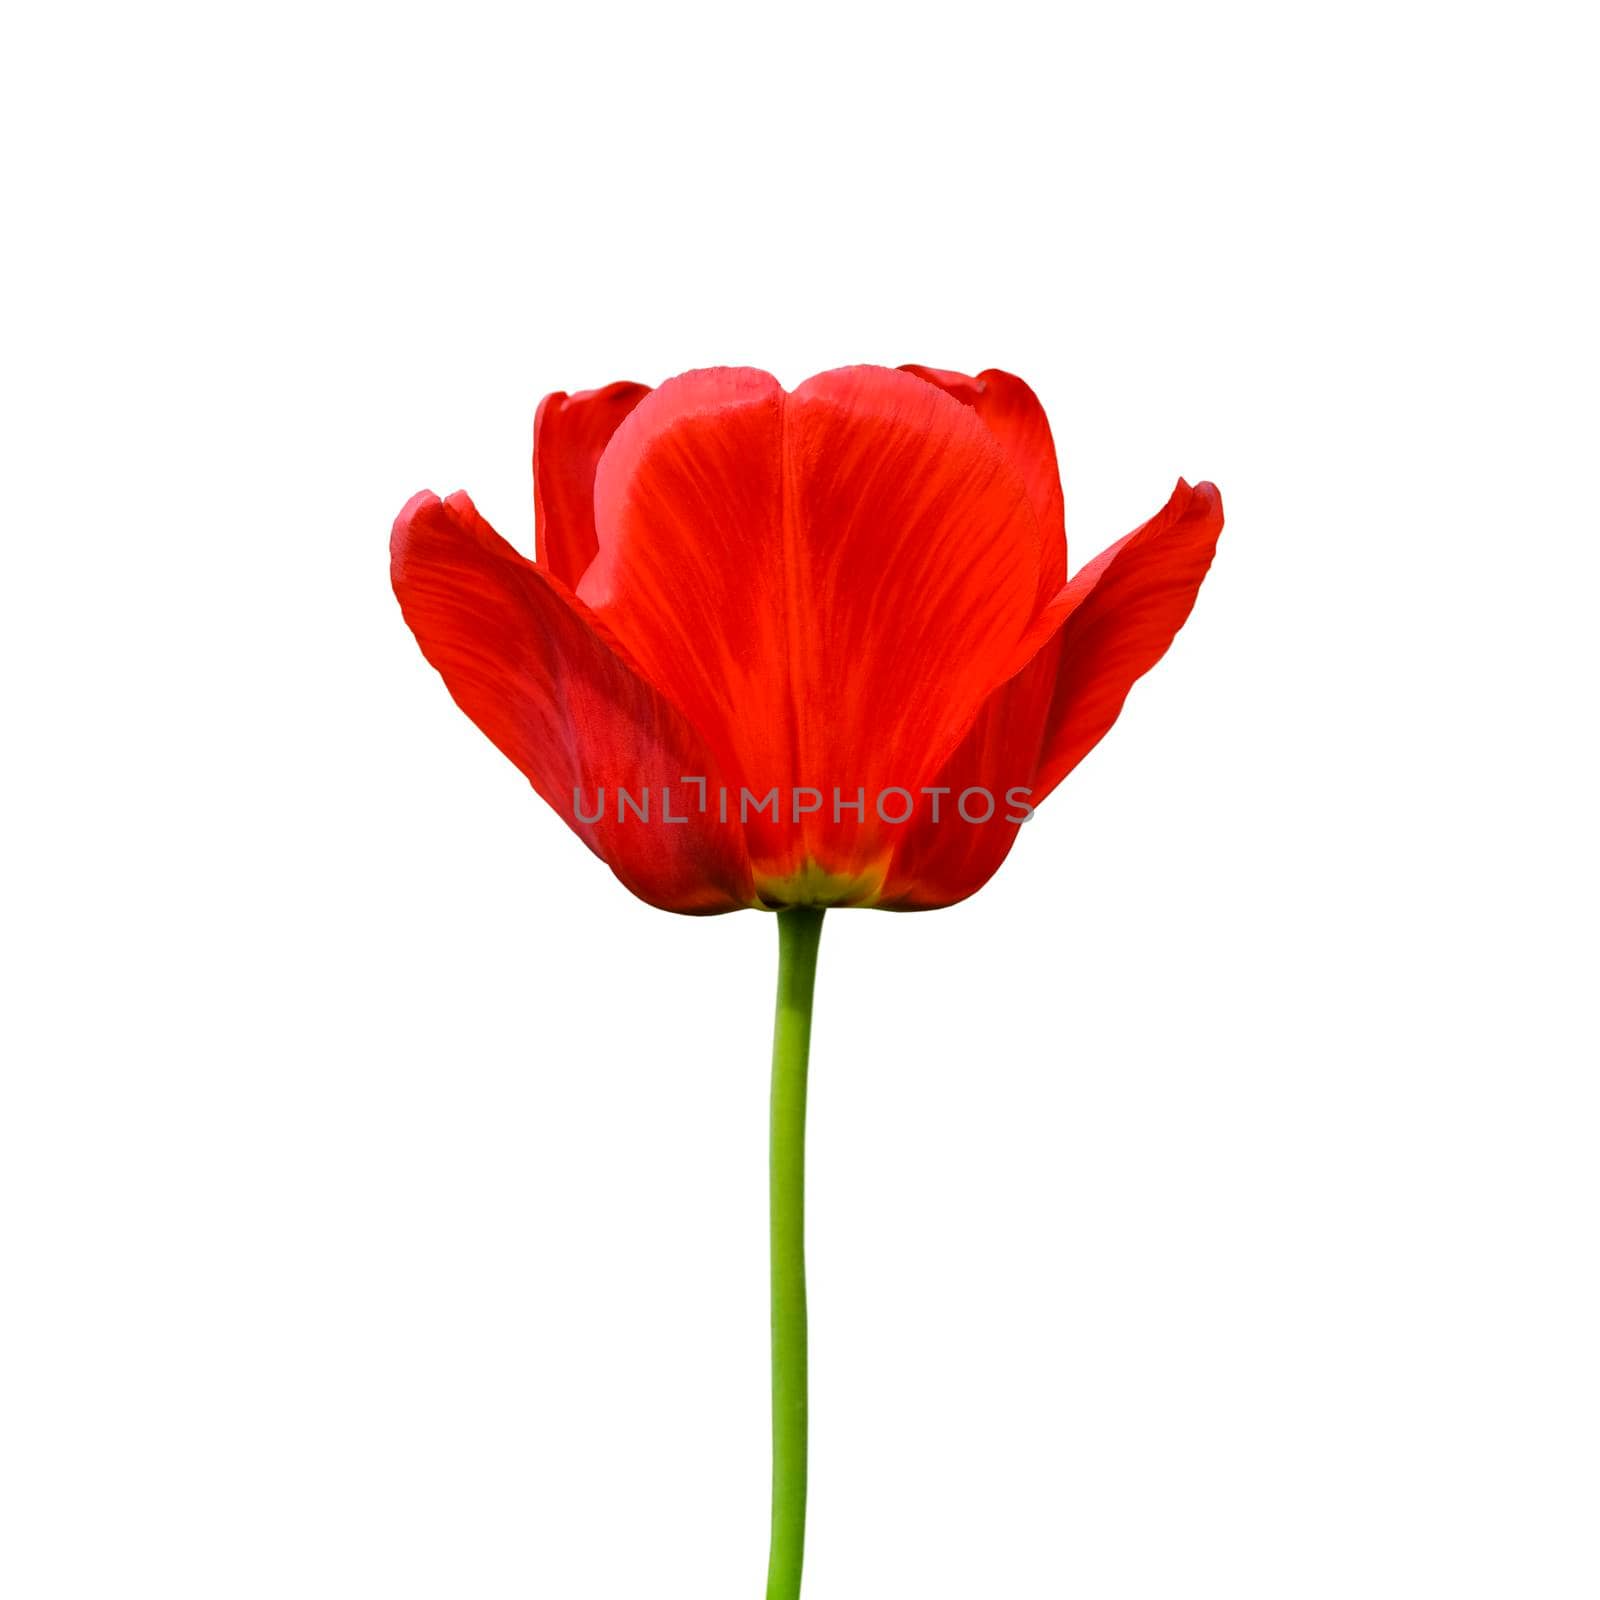 Red tulip flower isolated on white background. Tulip flower head isolated on white. Spring flowers.